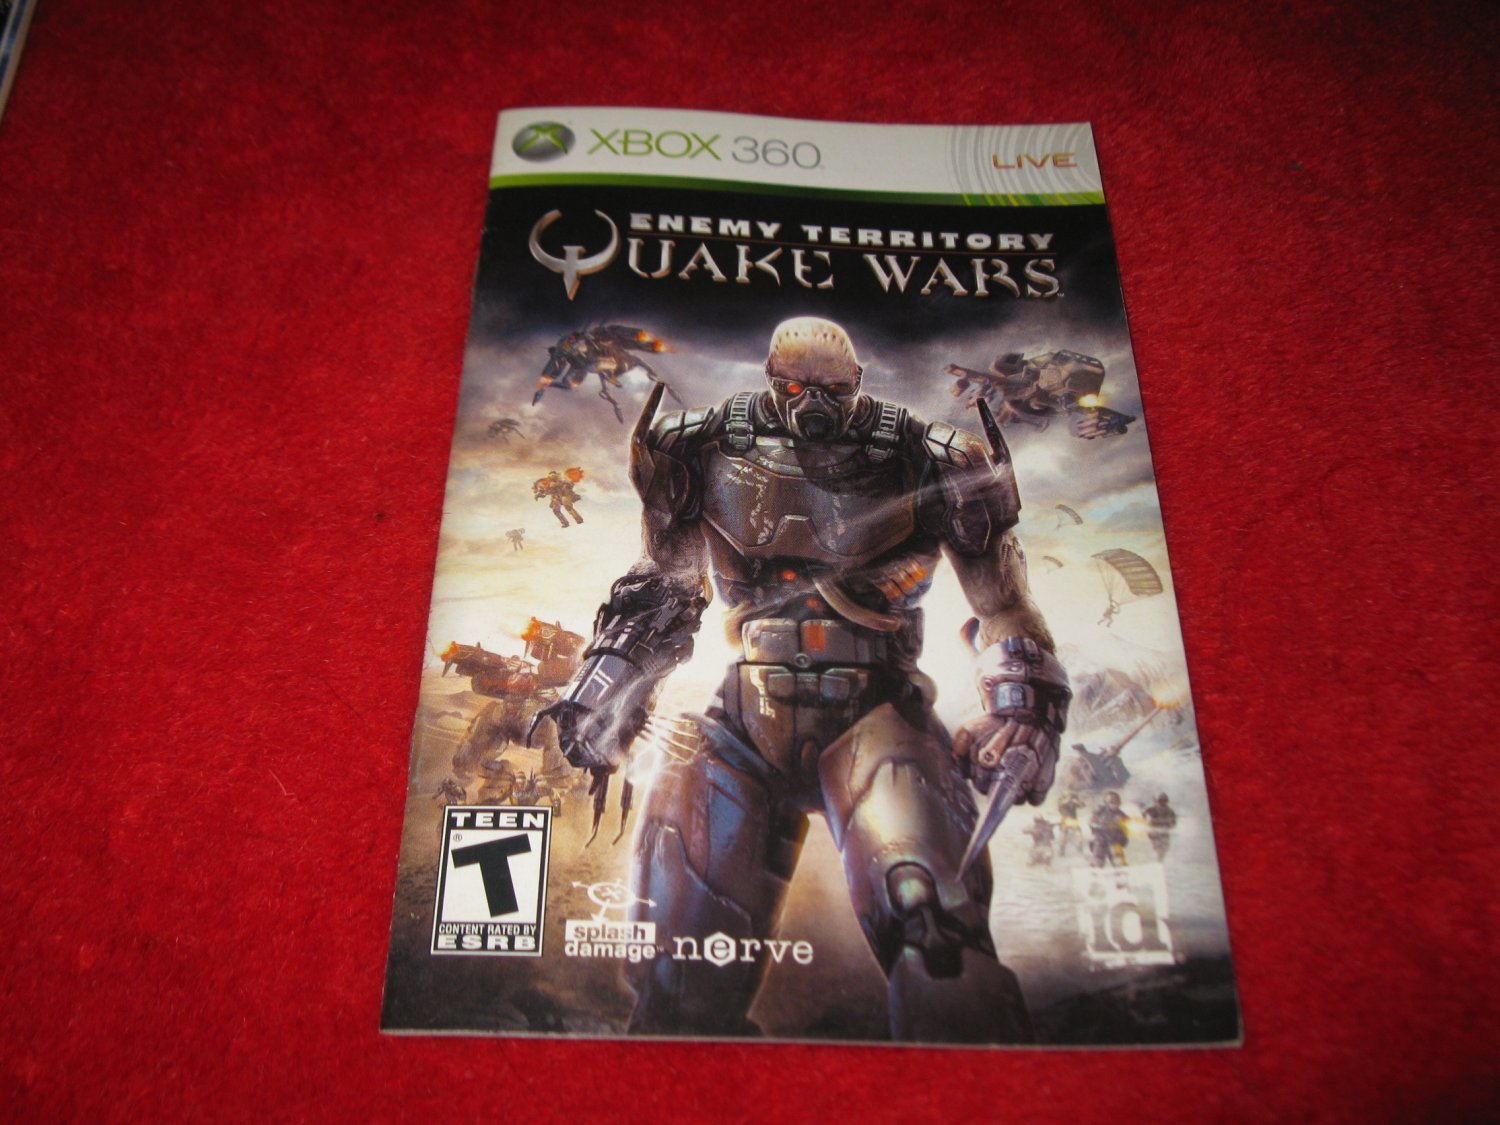 Quake Wars, Enemy Territory : Xbox 360 Video Game Instruction Booklet